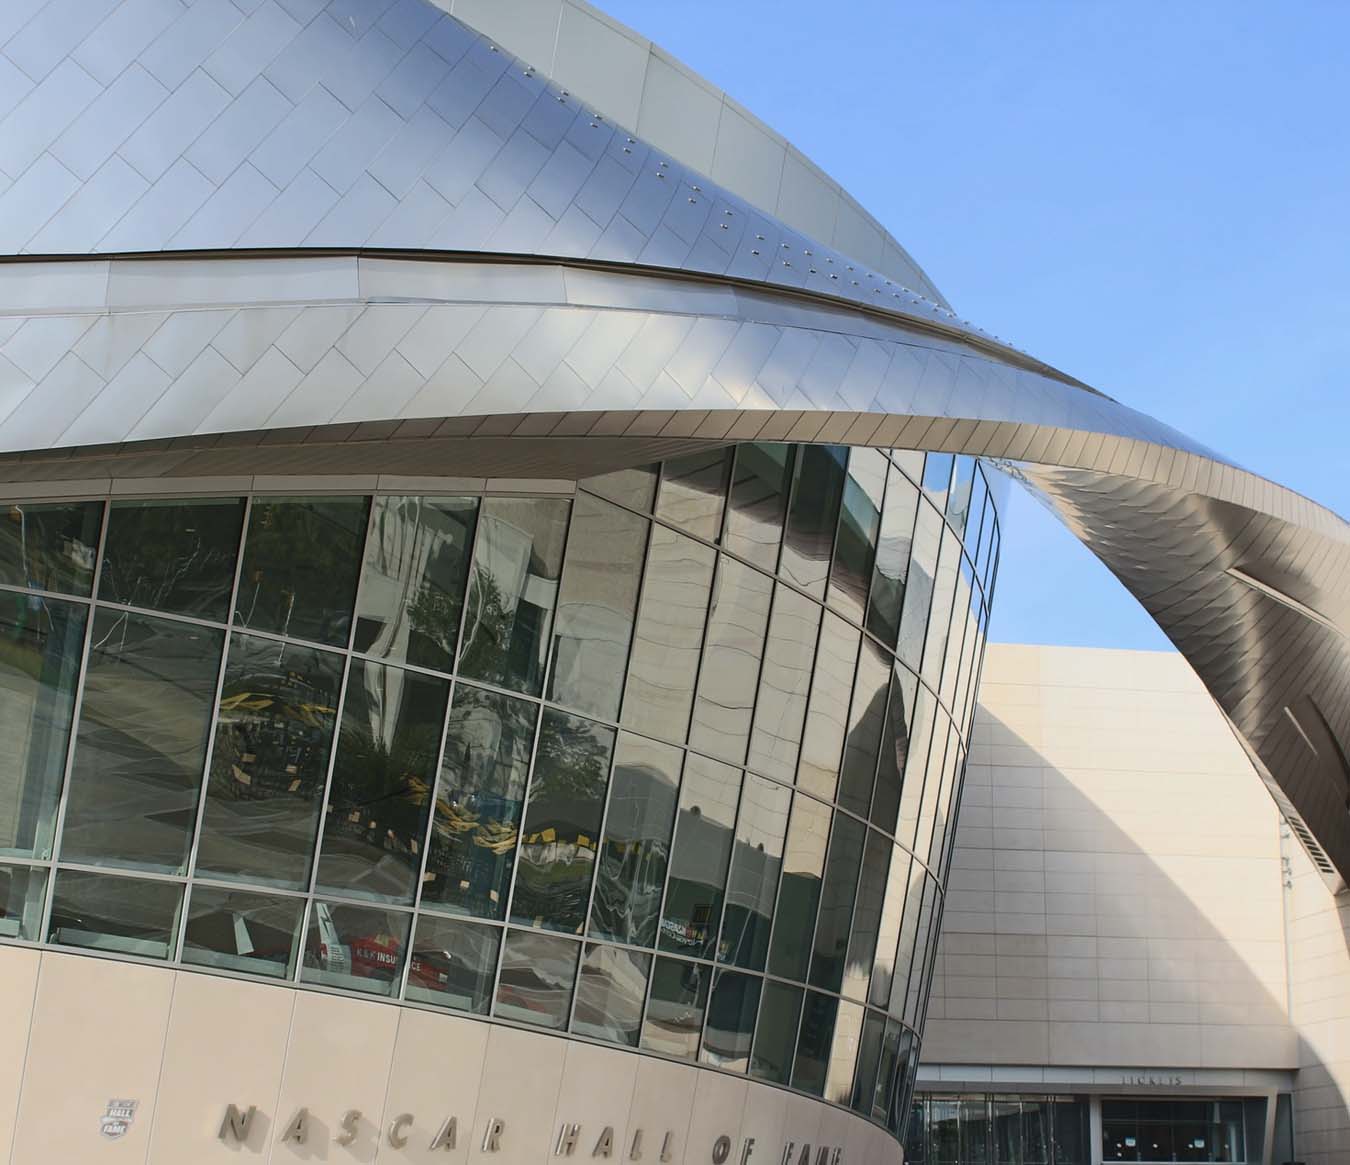 Things to Do in Charlotte - NASCAR Hall of Fame